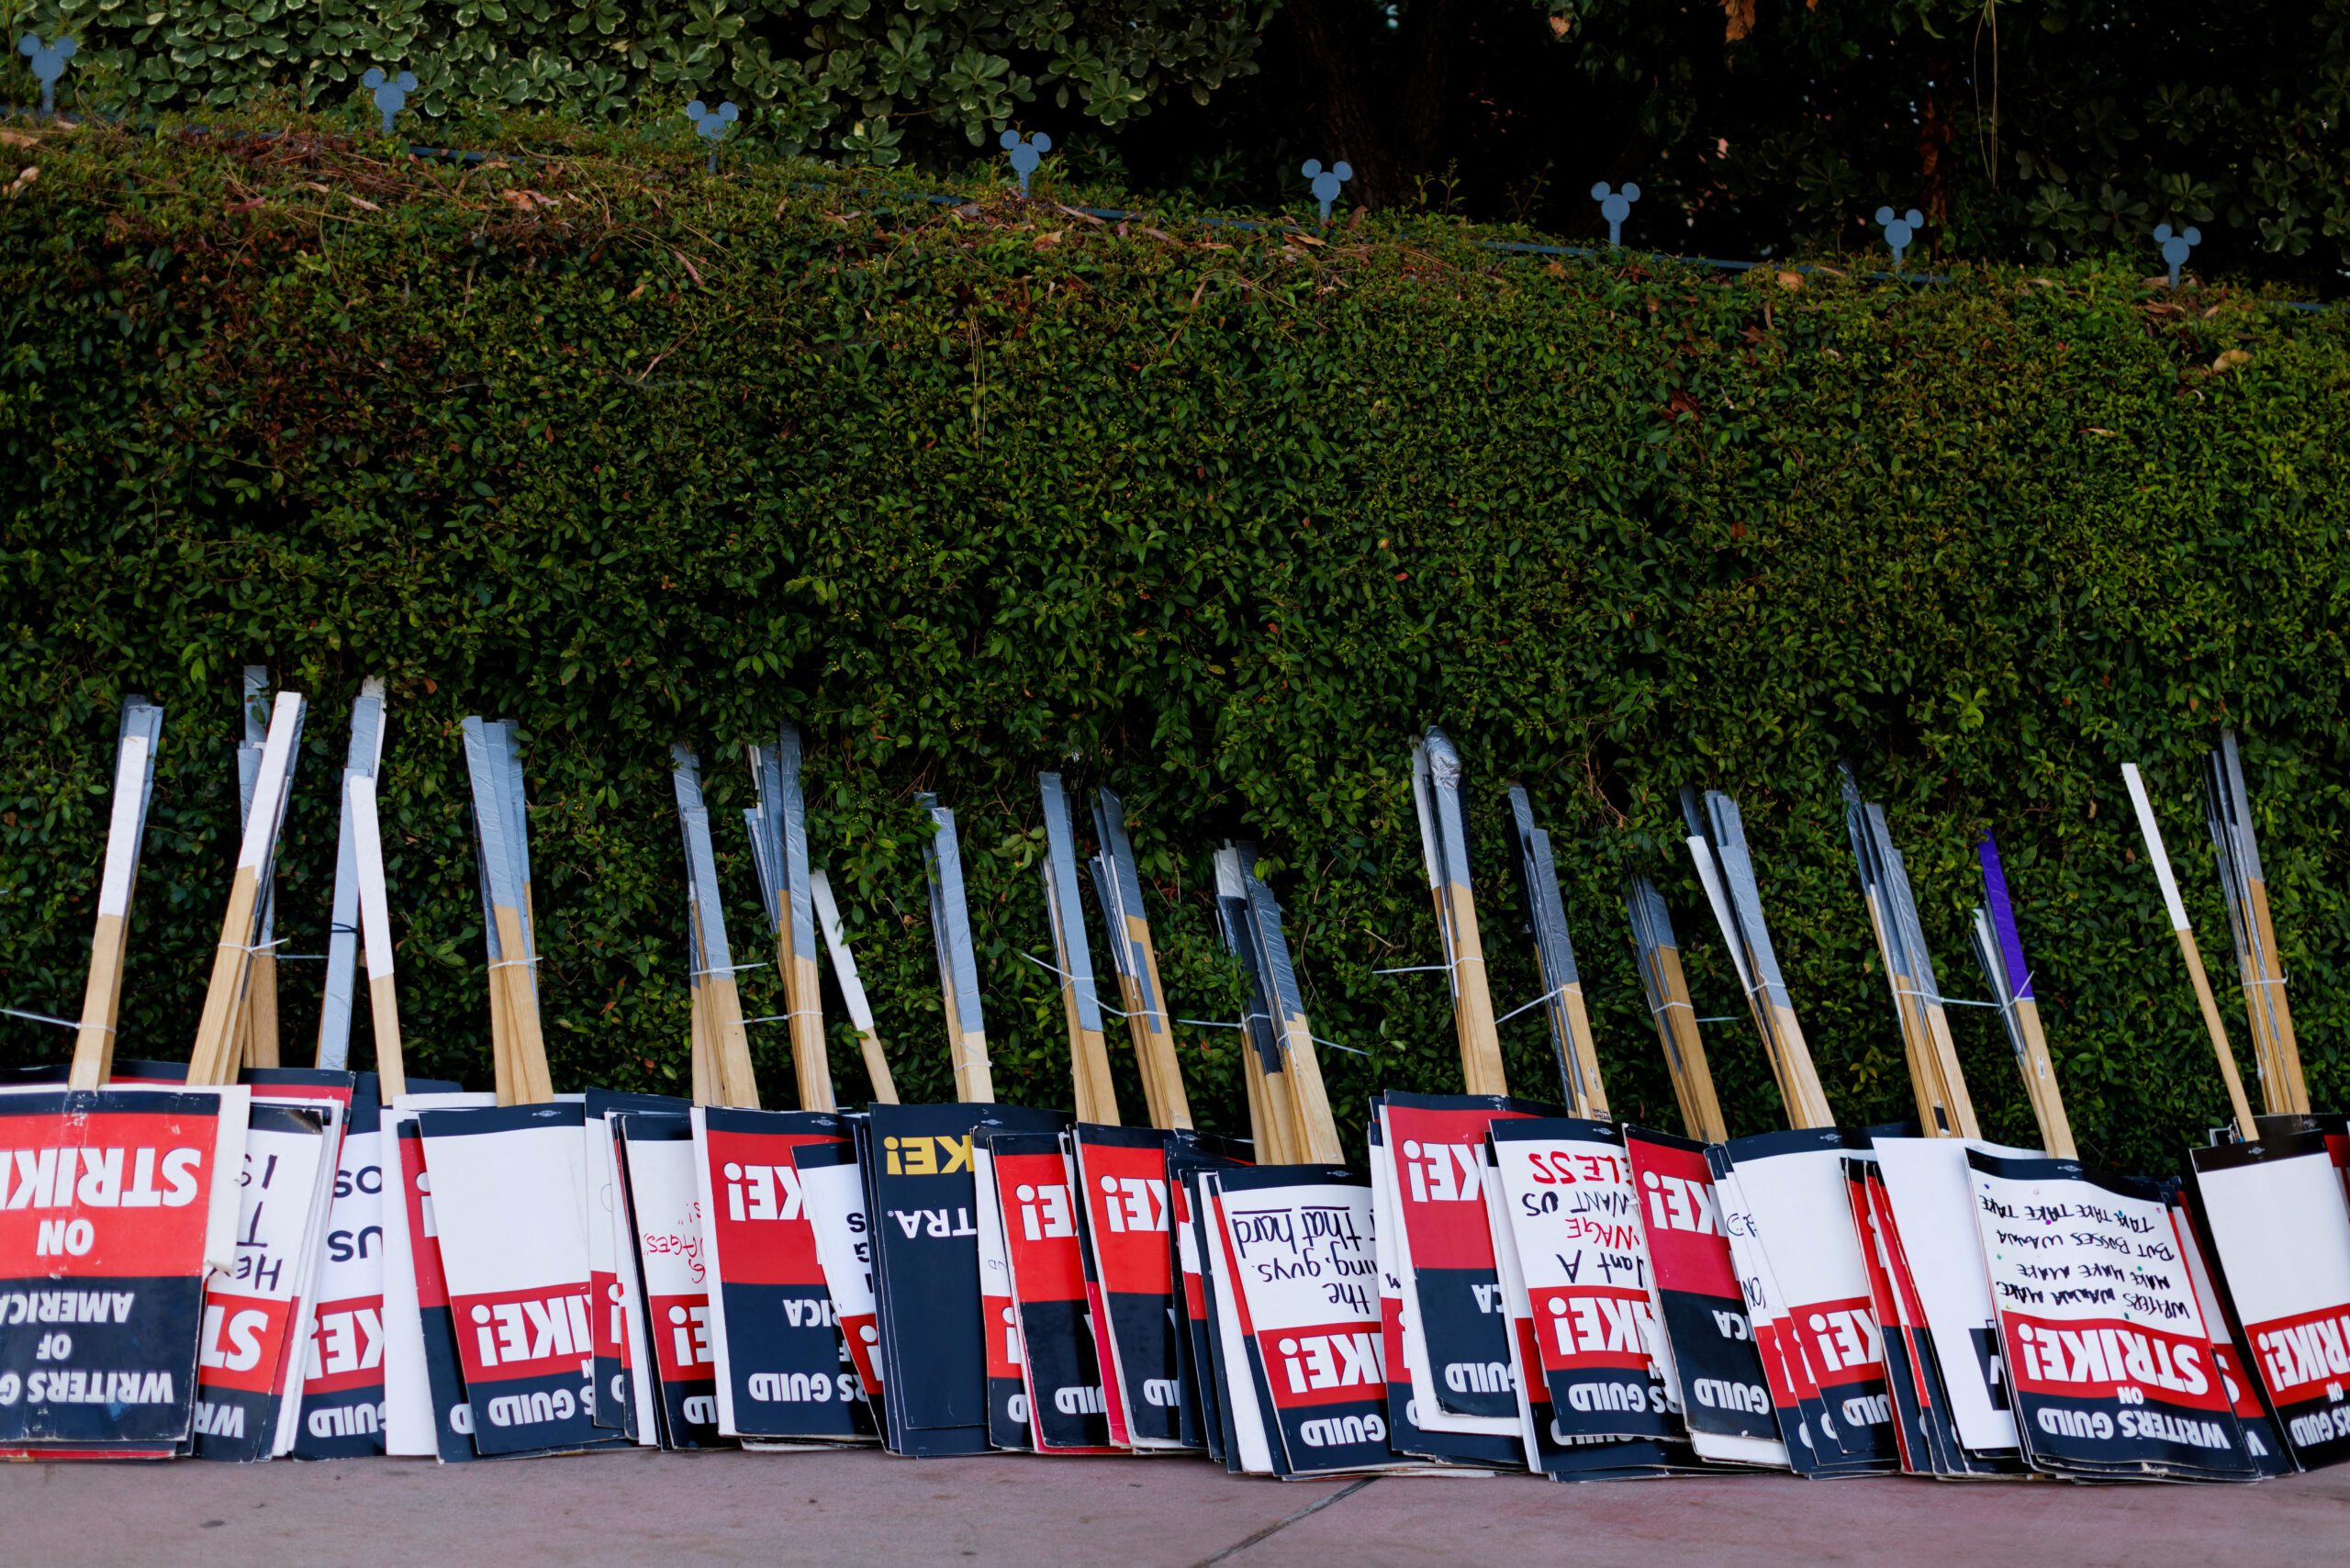 Hollywood workers resort to flea markets, bake sales as strikes drag on